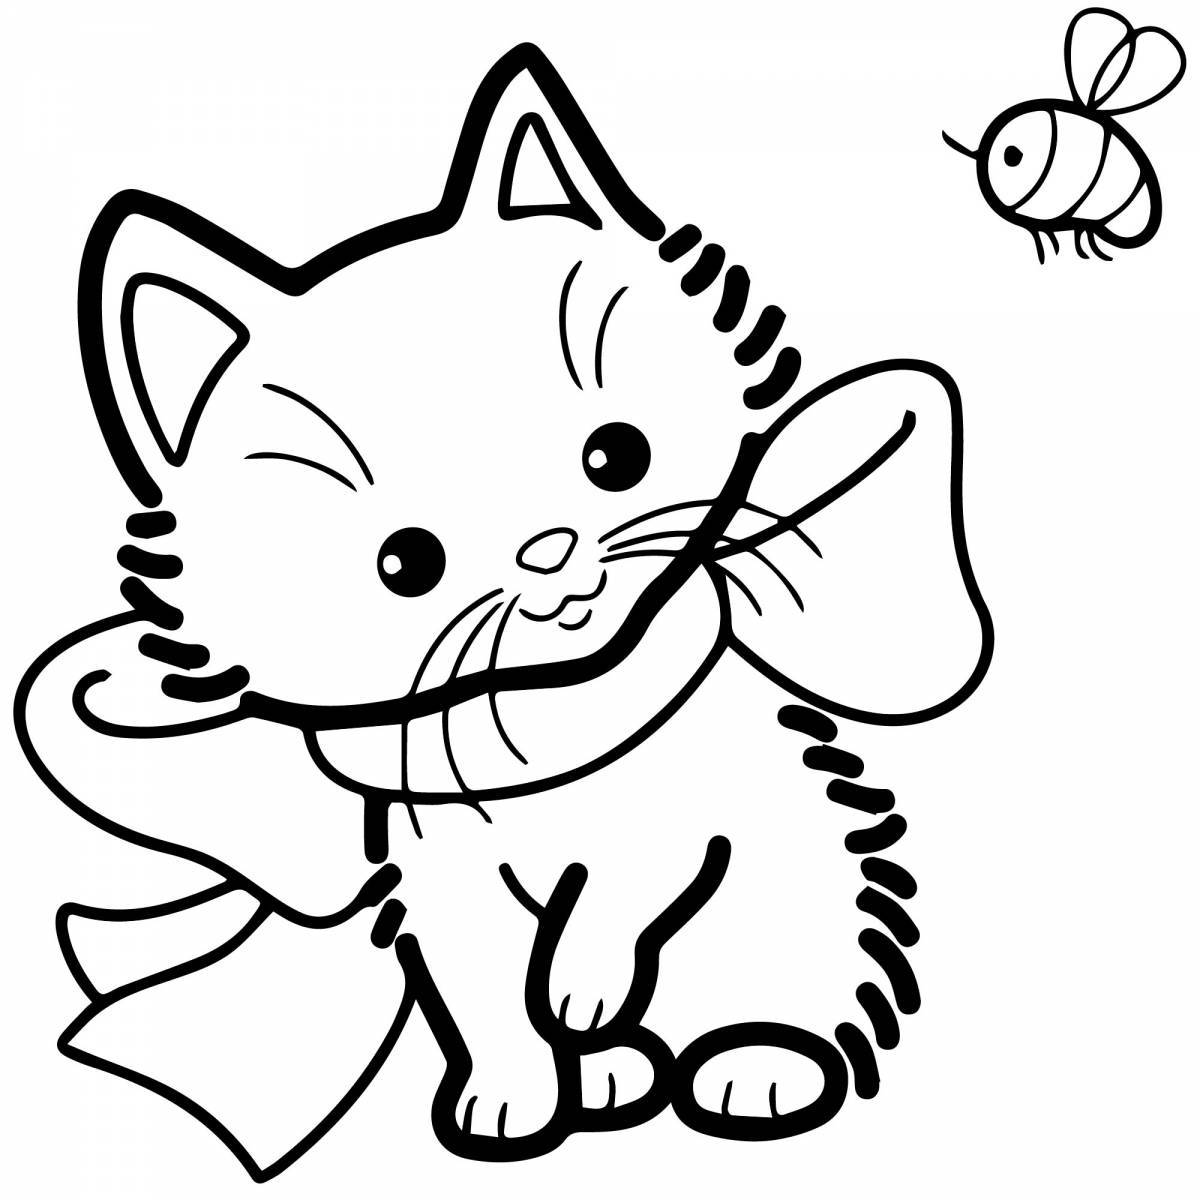 Fancy cat coloring book for kids